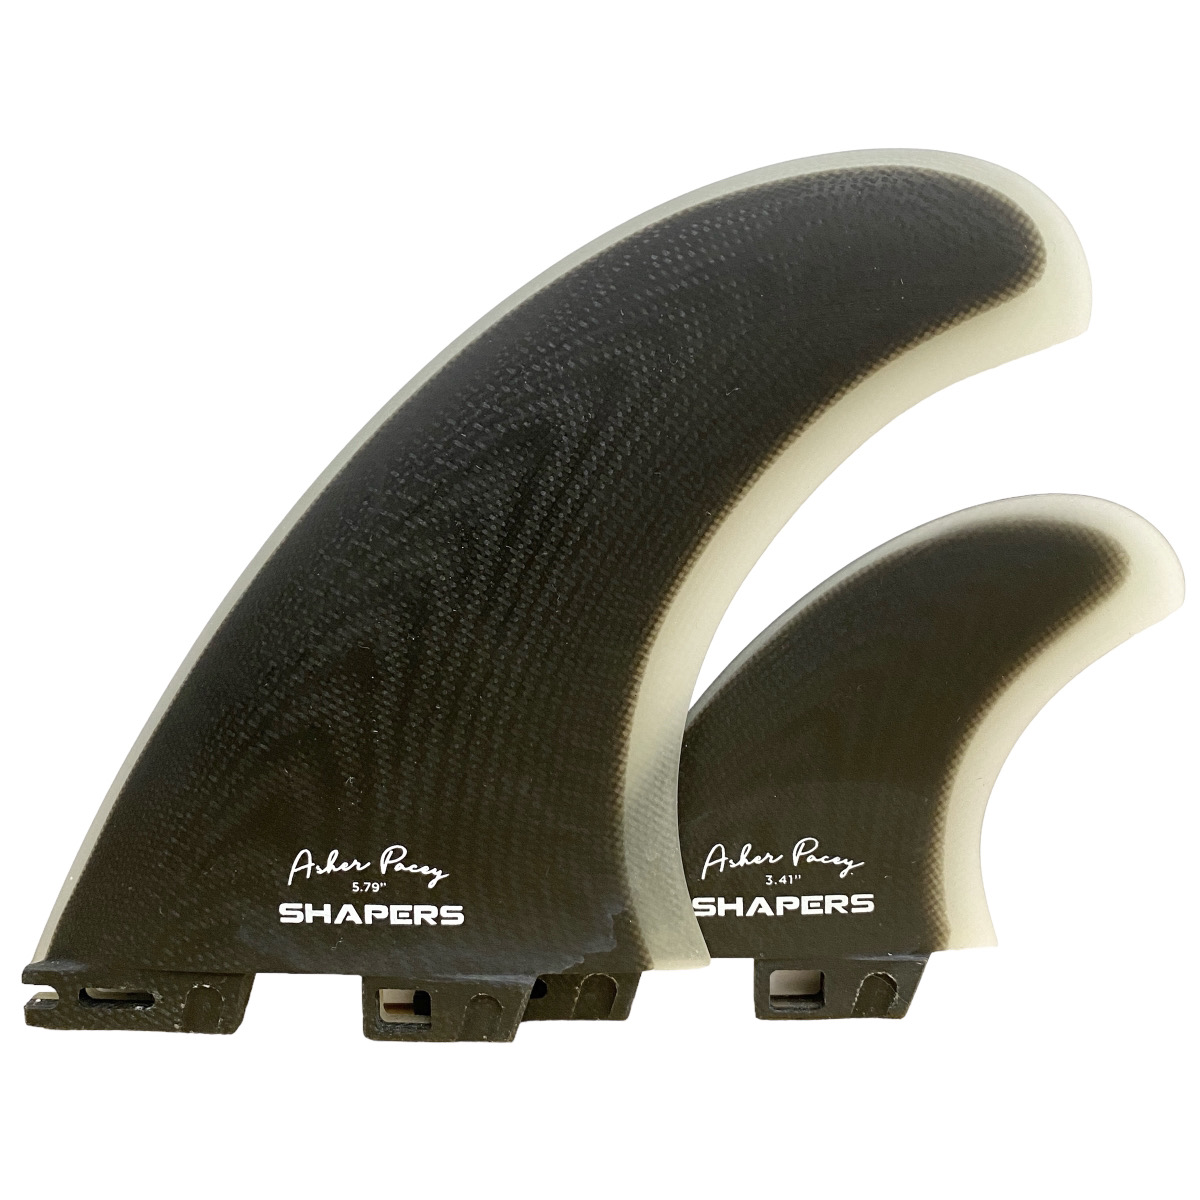 SHAPERS FINS シェーパーズフィン Asher Pacey 5.79" FCS2 type Twin Fin Set - Black Clear アッシャーパーシー ツインフィン トレイラーフィン FCS2タイプ